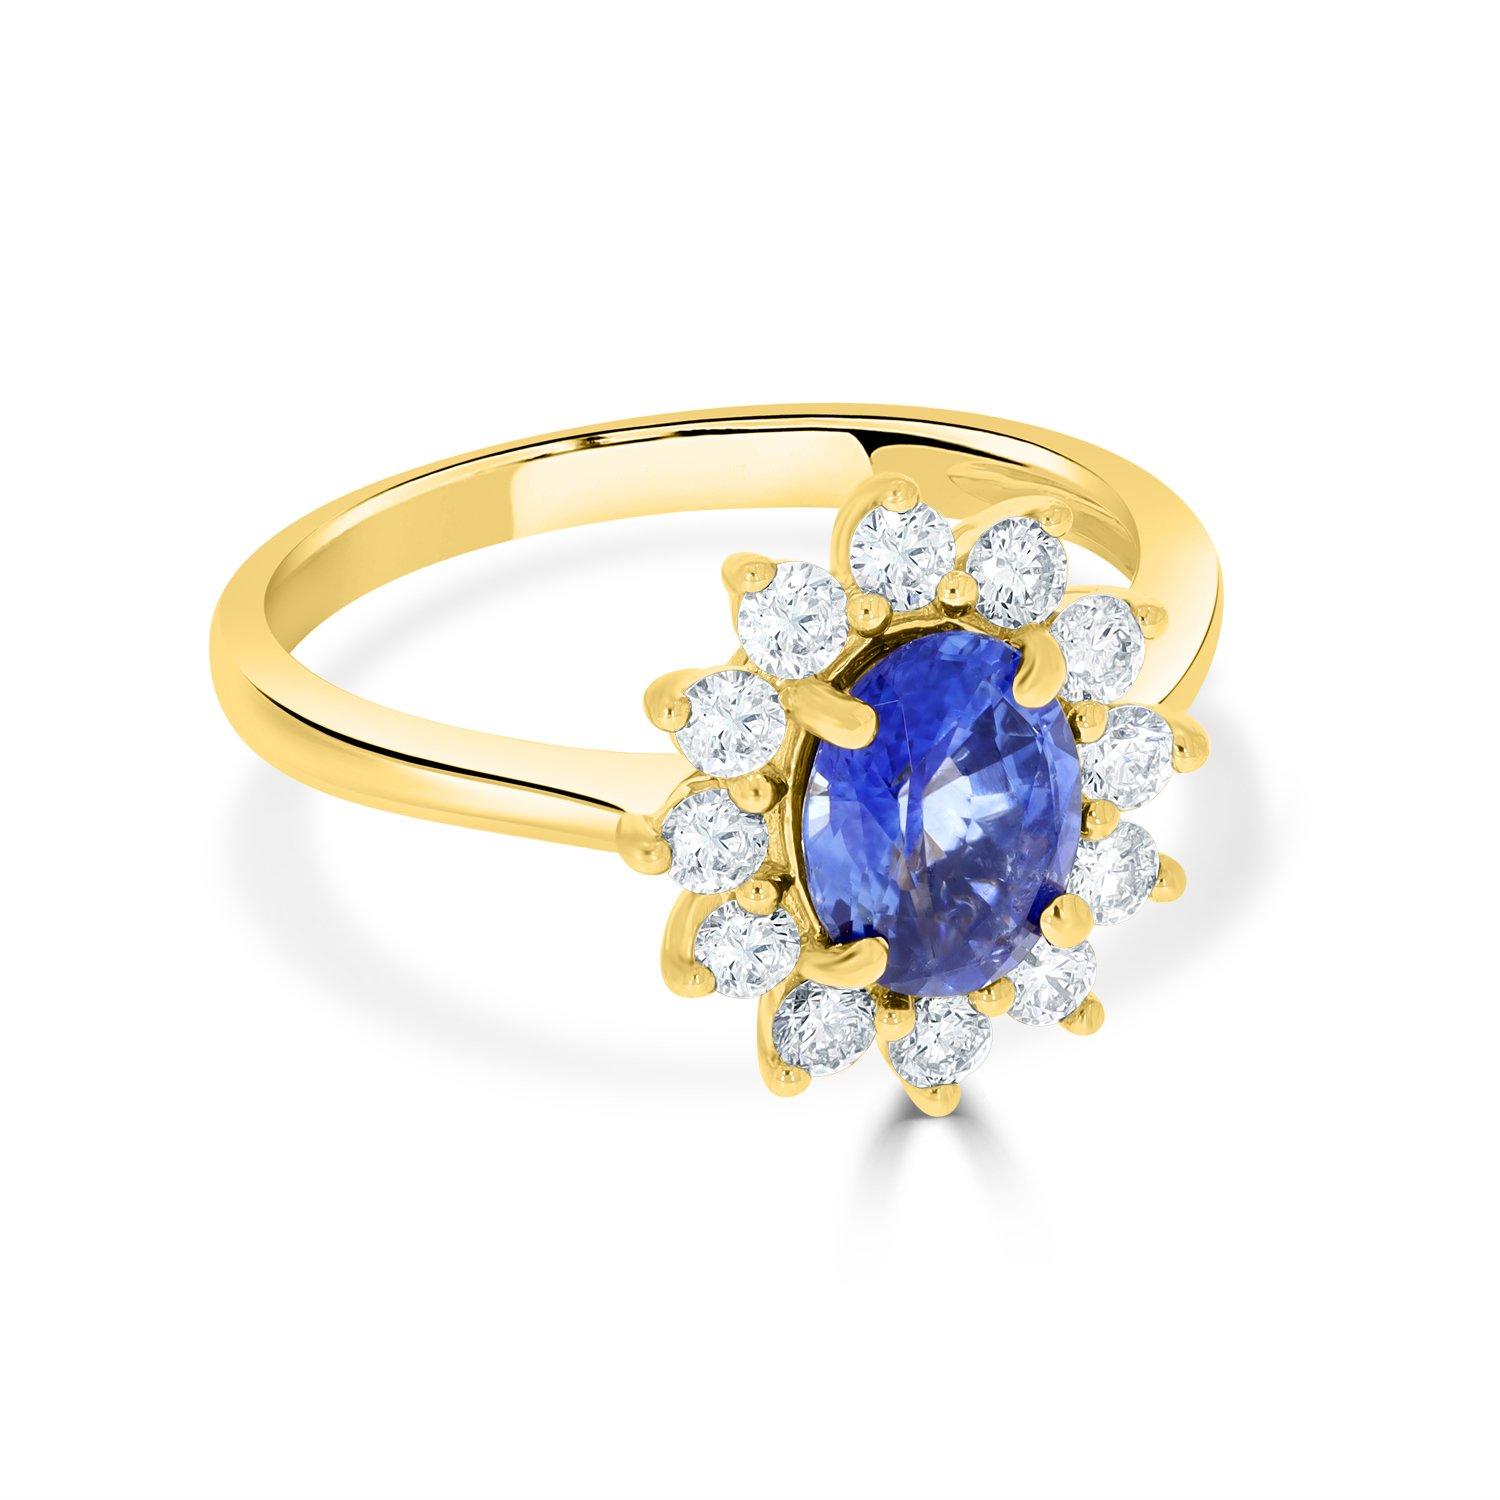 1.25Ct Sunburst Sapphire Ring with 0.51Tct Diamonds Set in 18K Yellow Gold In New Condition For Sale In New York, NY